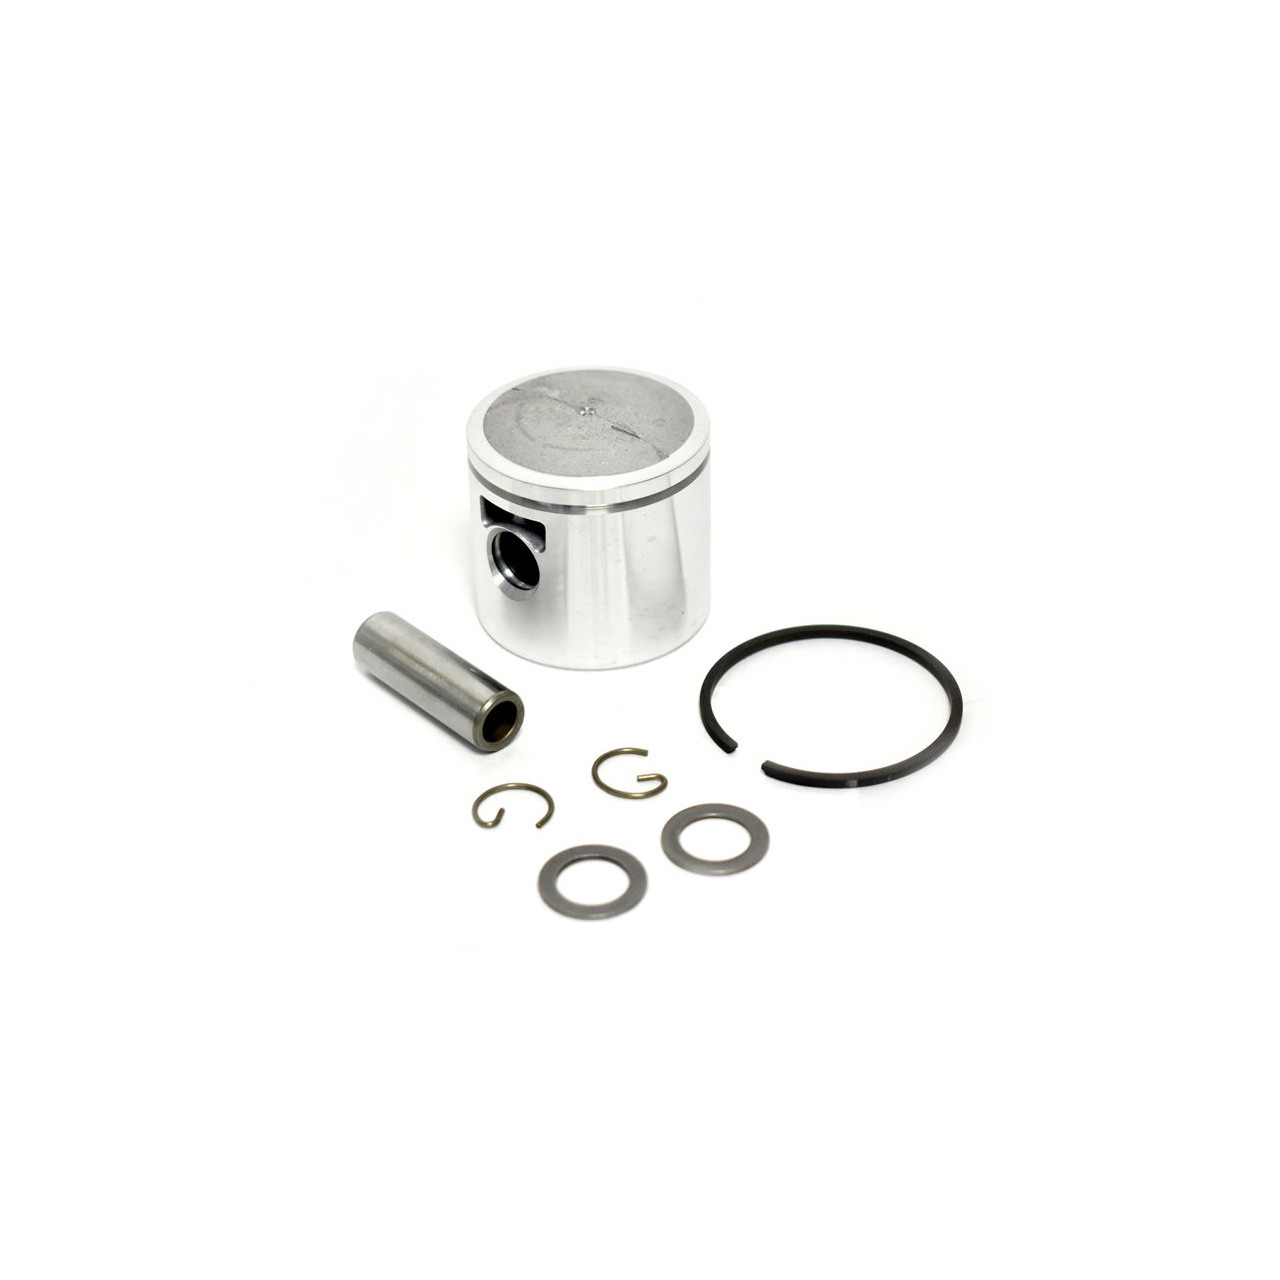 PPT-265ES PISTON KIT 34MM P021009771 PPF-265SB SHC-265 HCA-265 P265SB  PT266S SRM-265 25.4CC POLE PRUNER RINGS CLIPS PIN ASSEMBLY - AliExpress